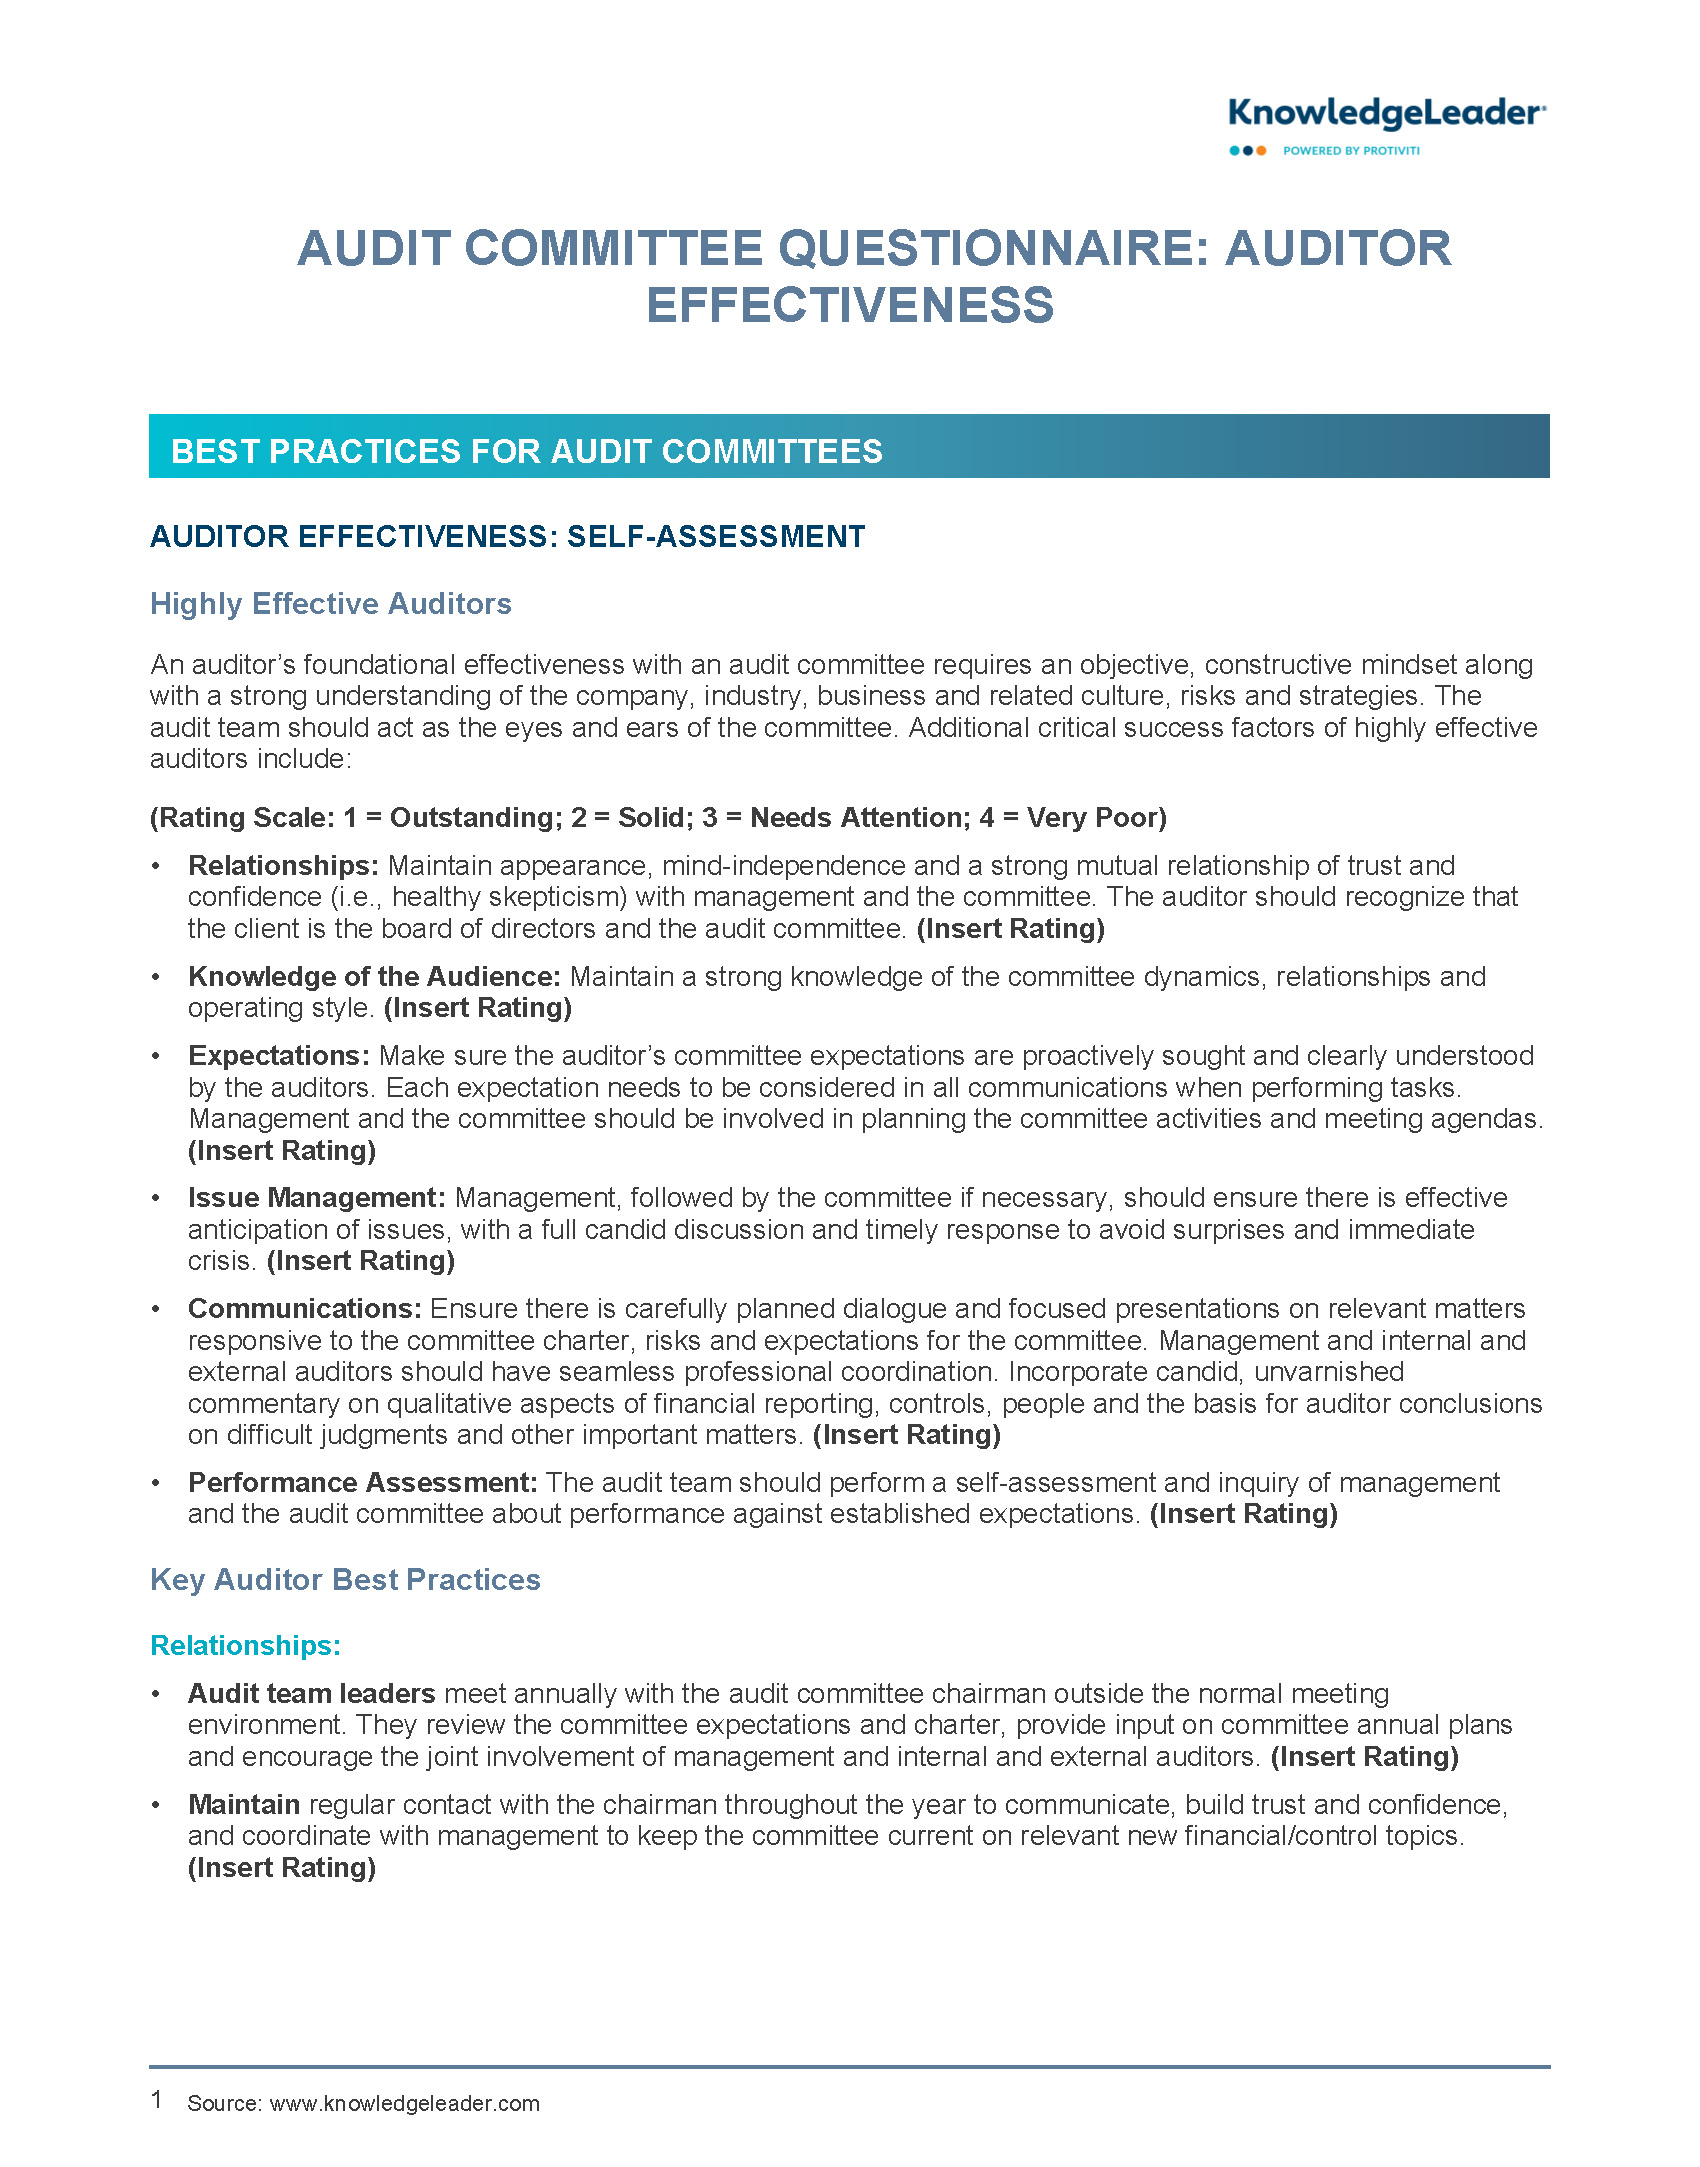 Audit Committee Questionnaire - Auditor Effectiveness